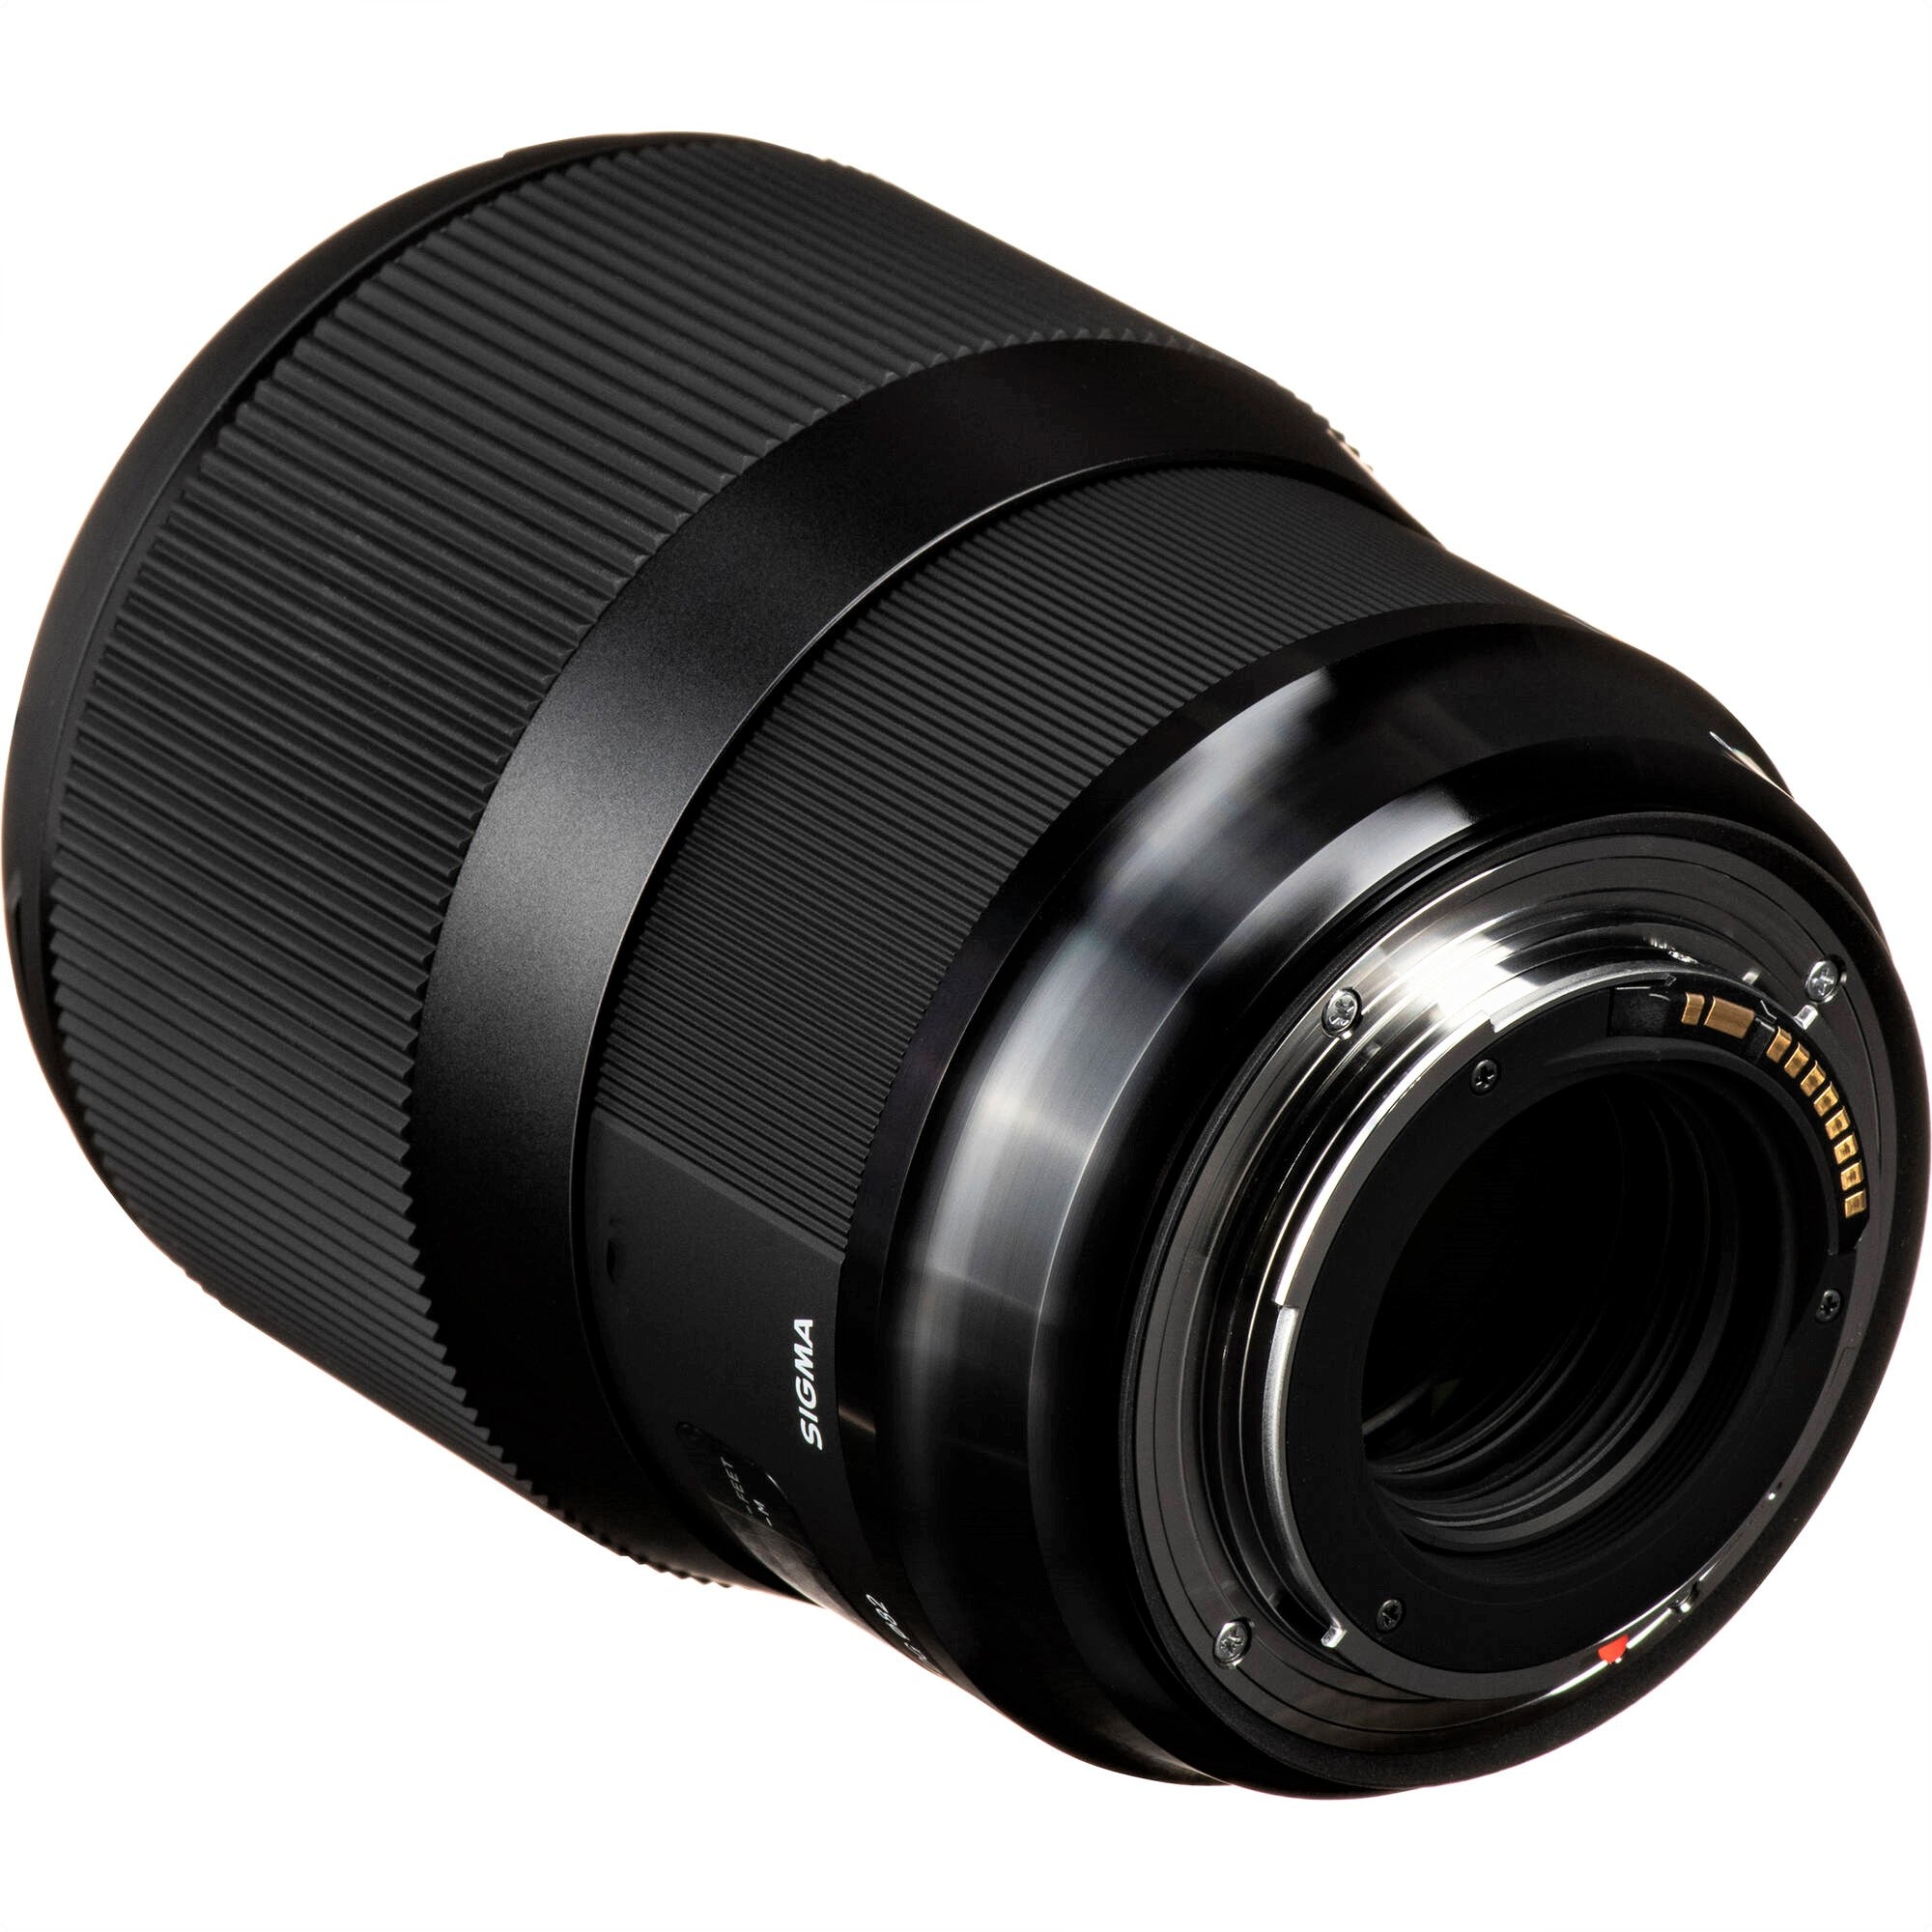 Sigma 135mm F1.8 DG HSM Art Lens for Canon EF in a Back-Side View